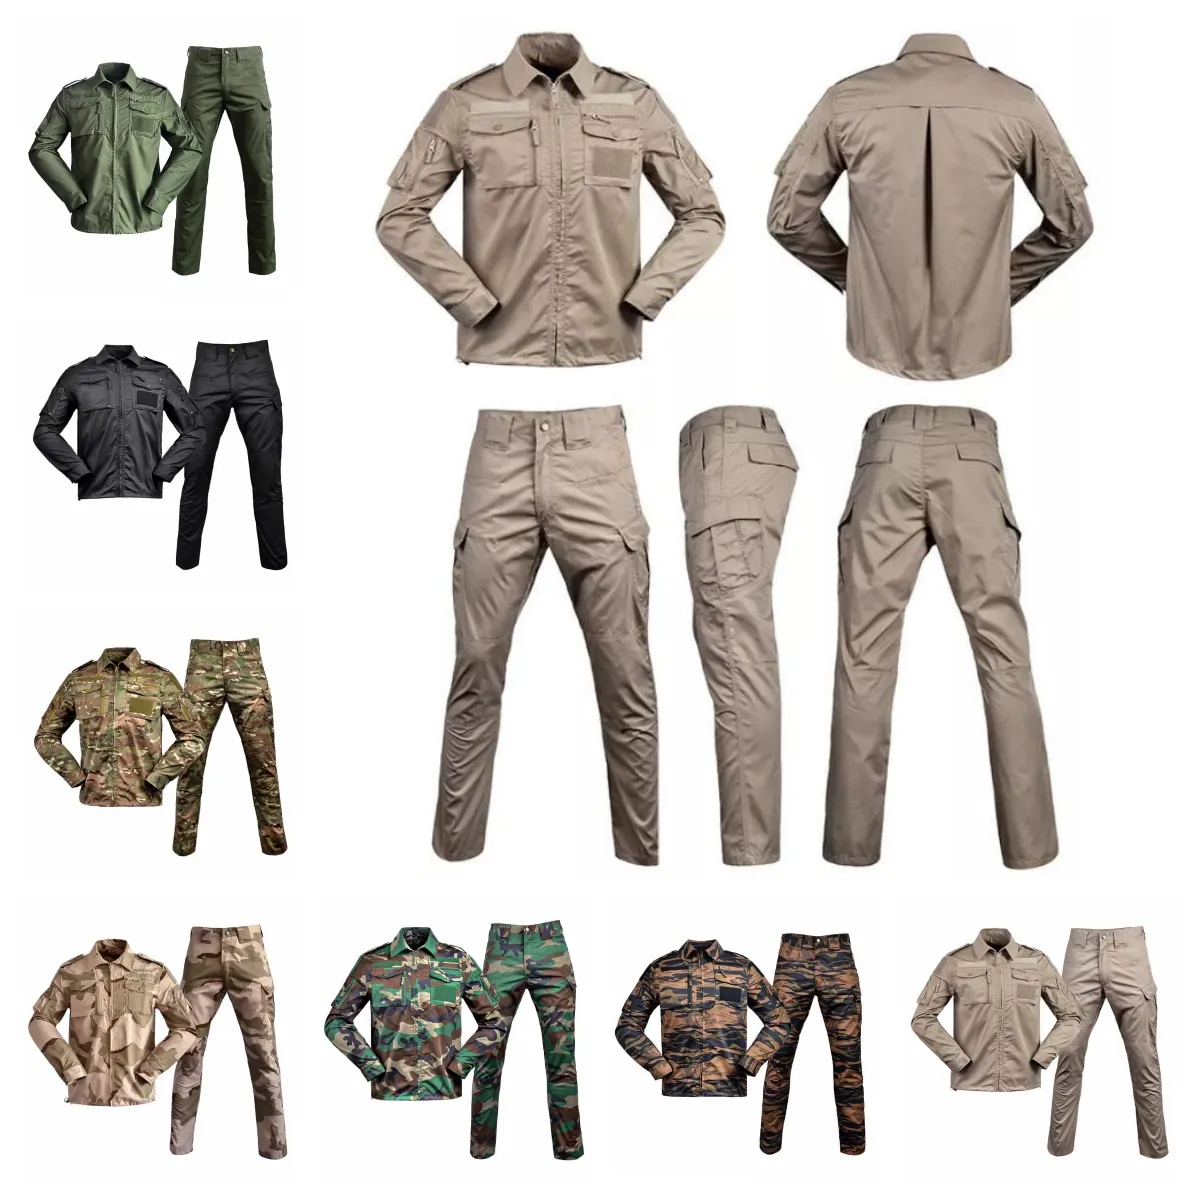 Tactical Long Sleeve Security Guard Officer Uniforms Clothing Multicam Camouflage Sports Combat Training Top Pants Suits